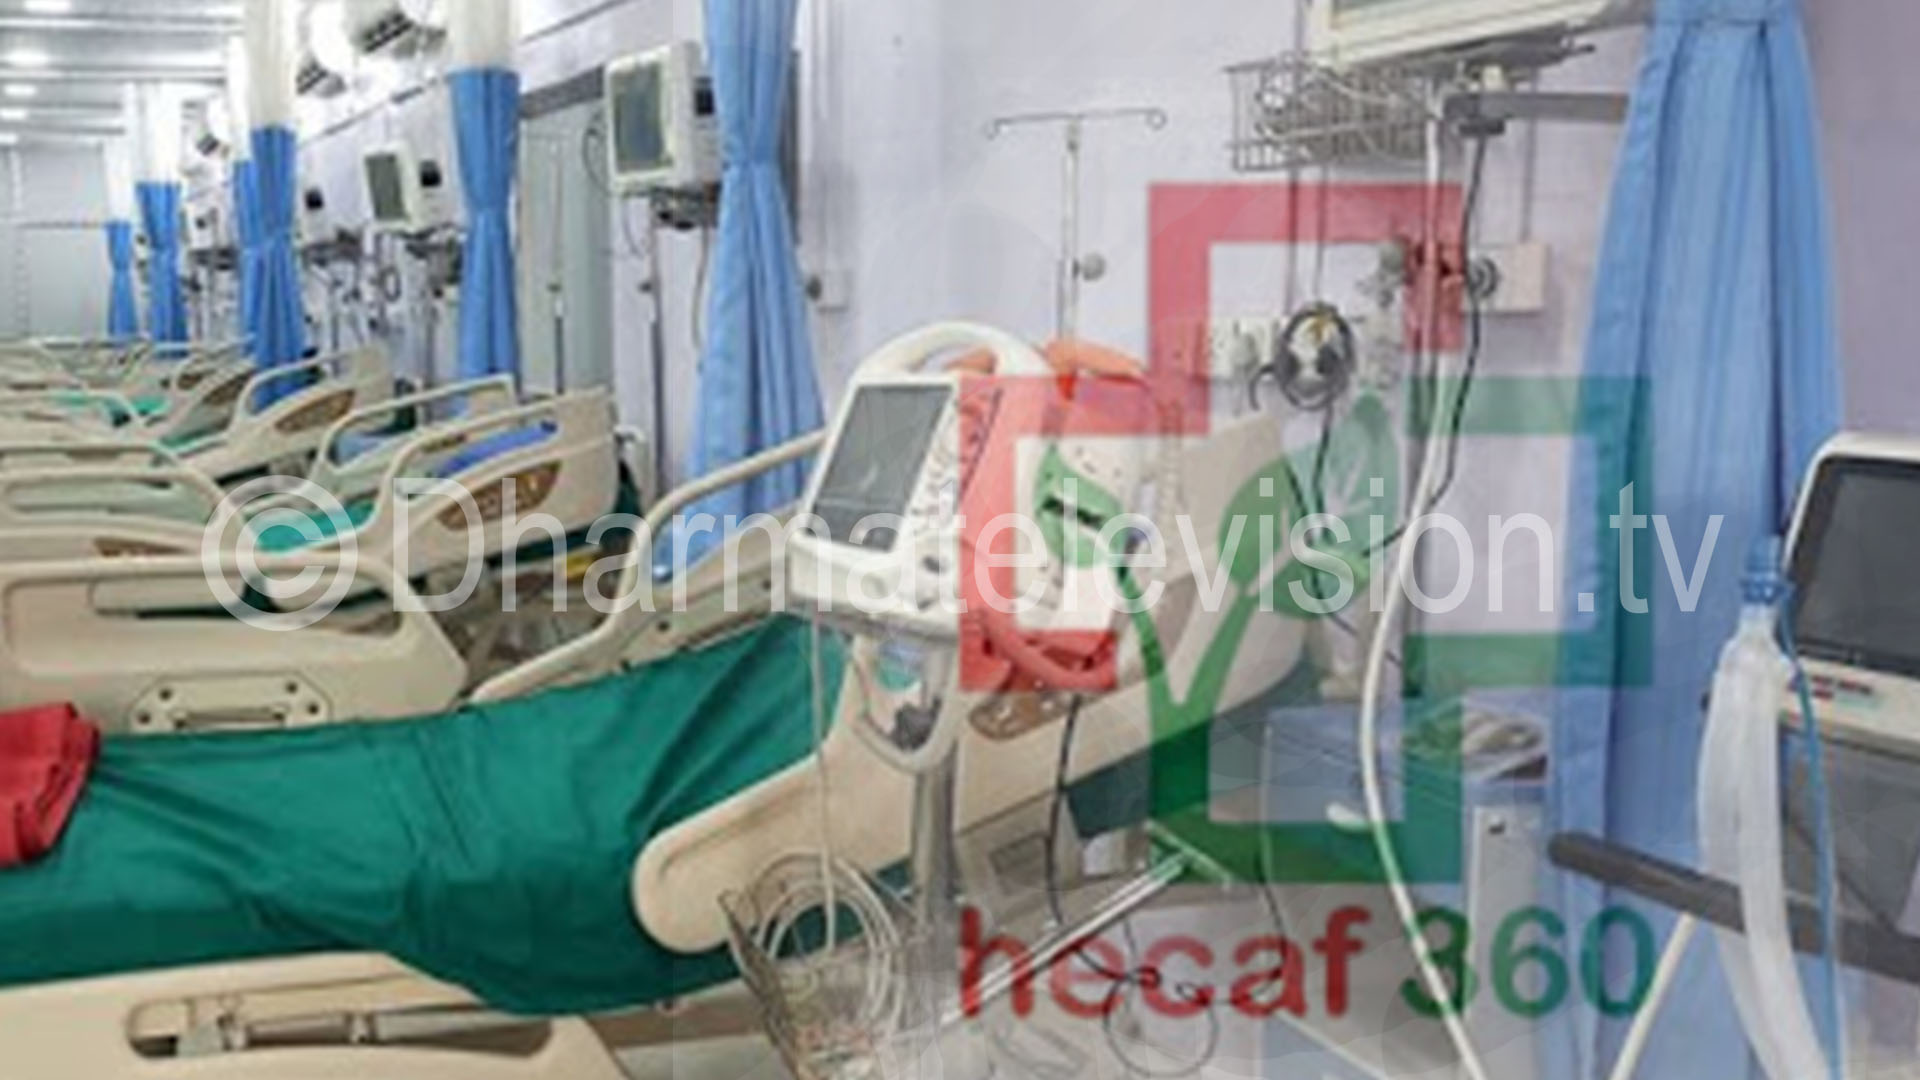 HECAF donated 20 ventilators and other health supplies